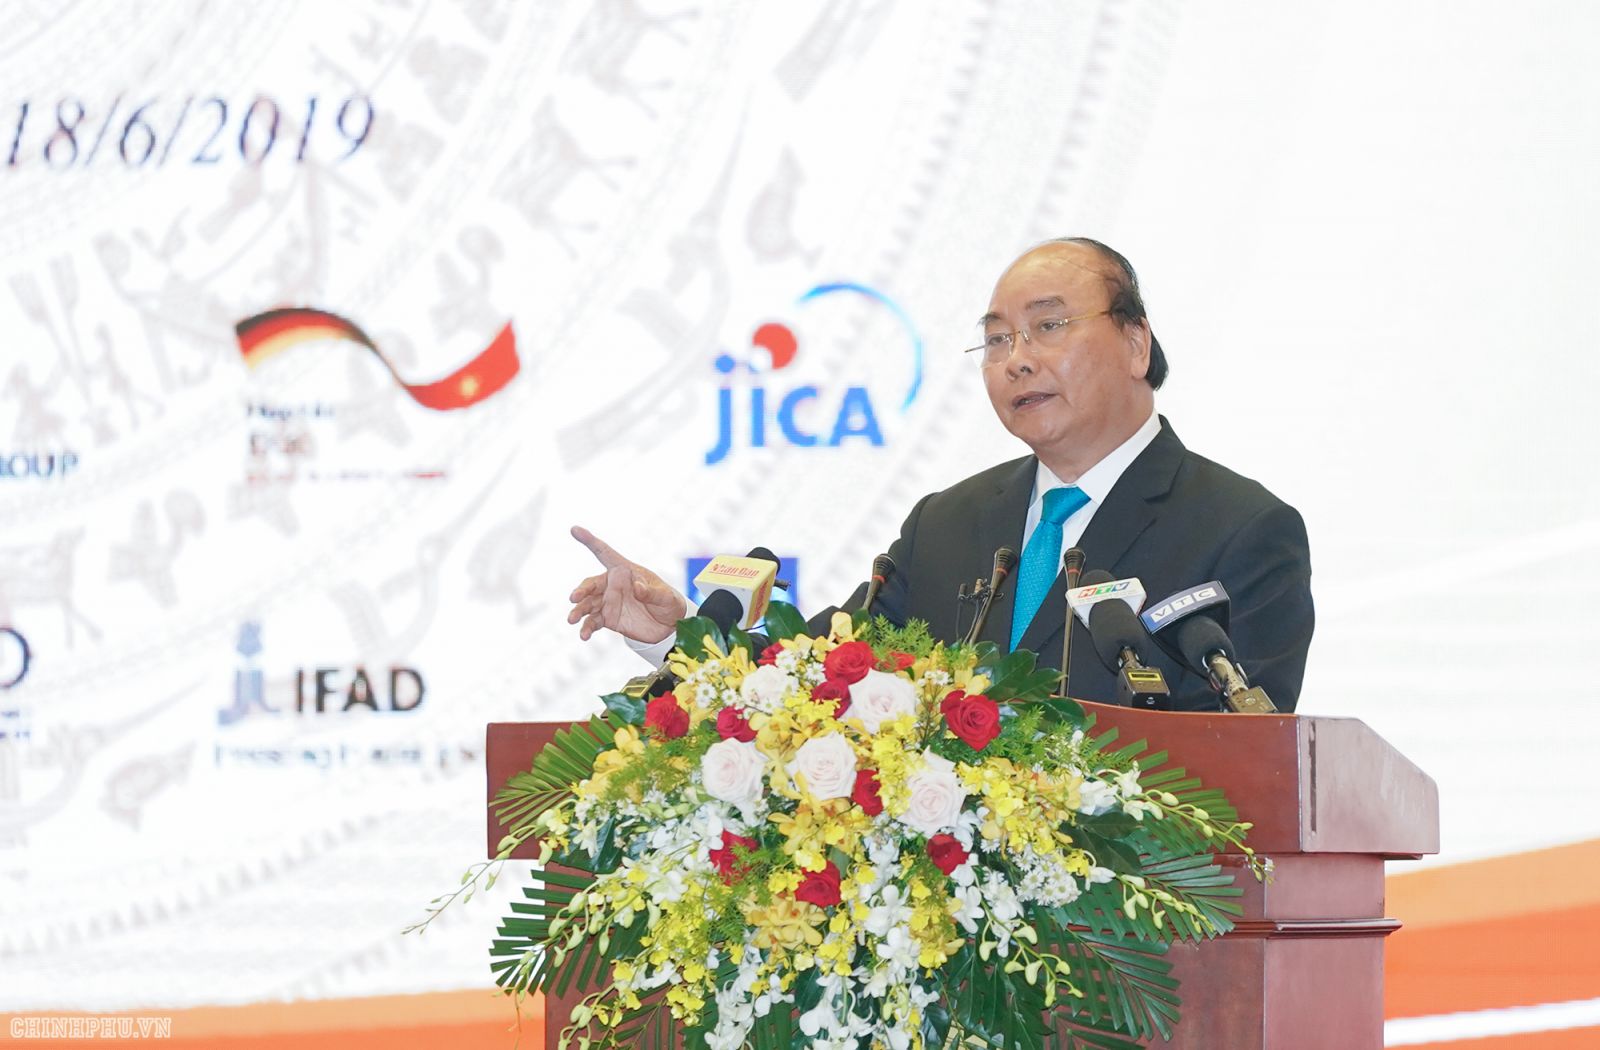 Prime Minister Nguyen Xuan Phuc addressed the event. (Source: VGP)